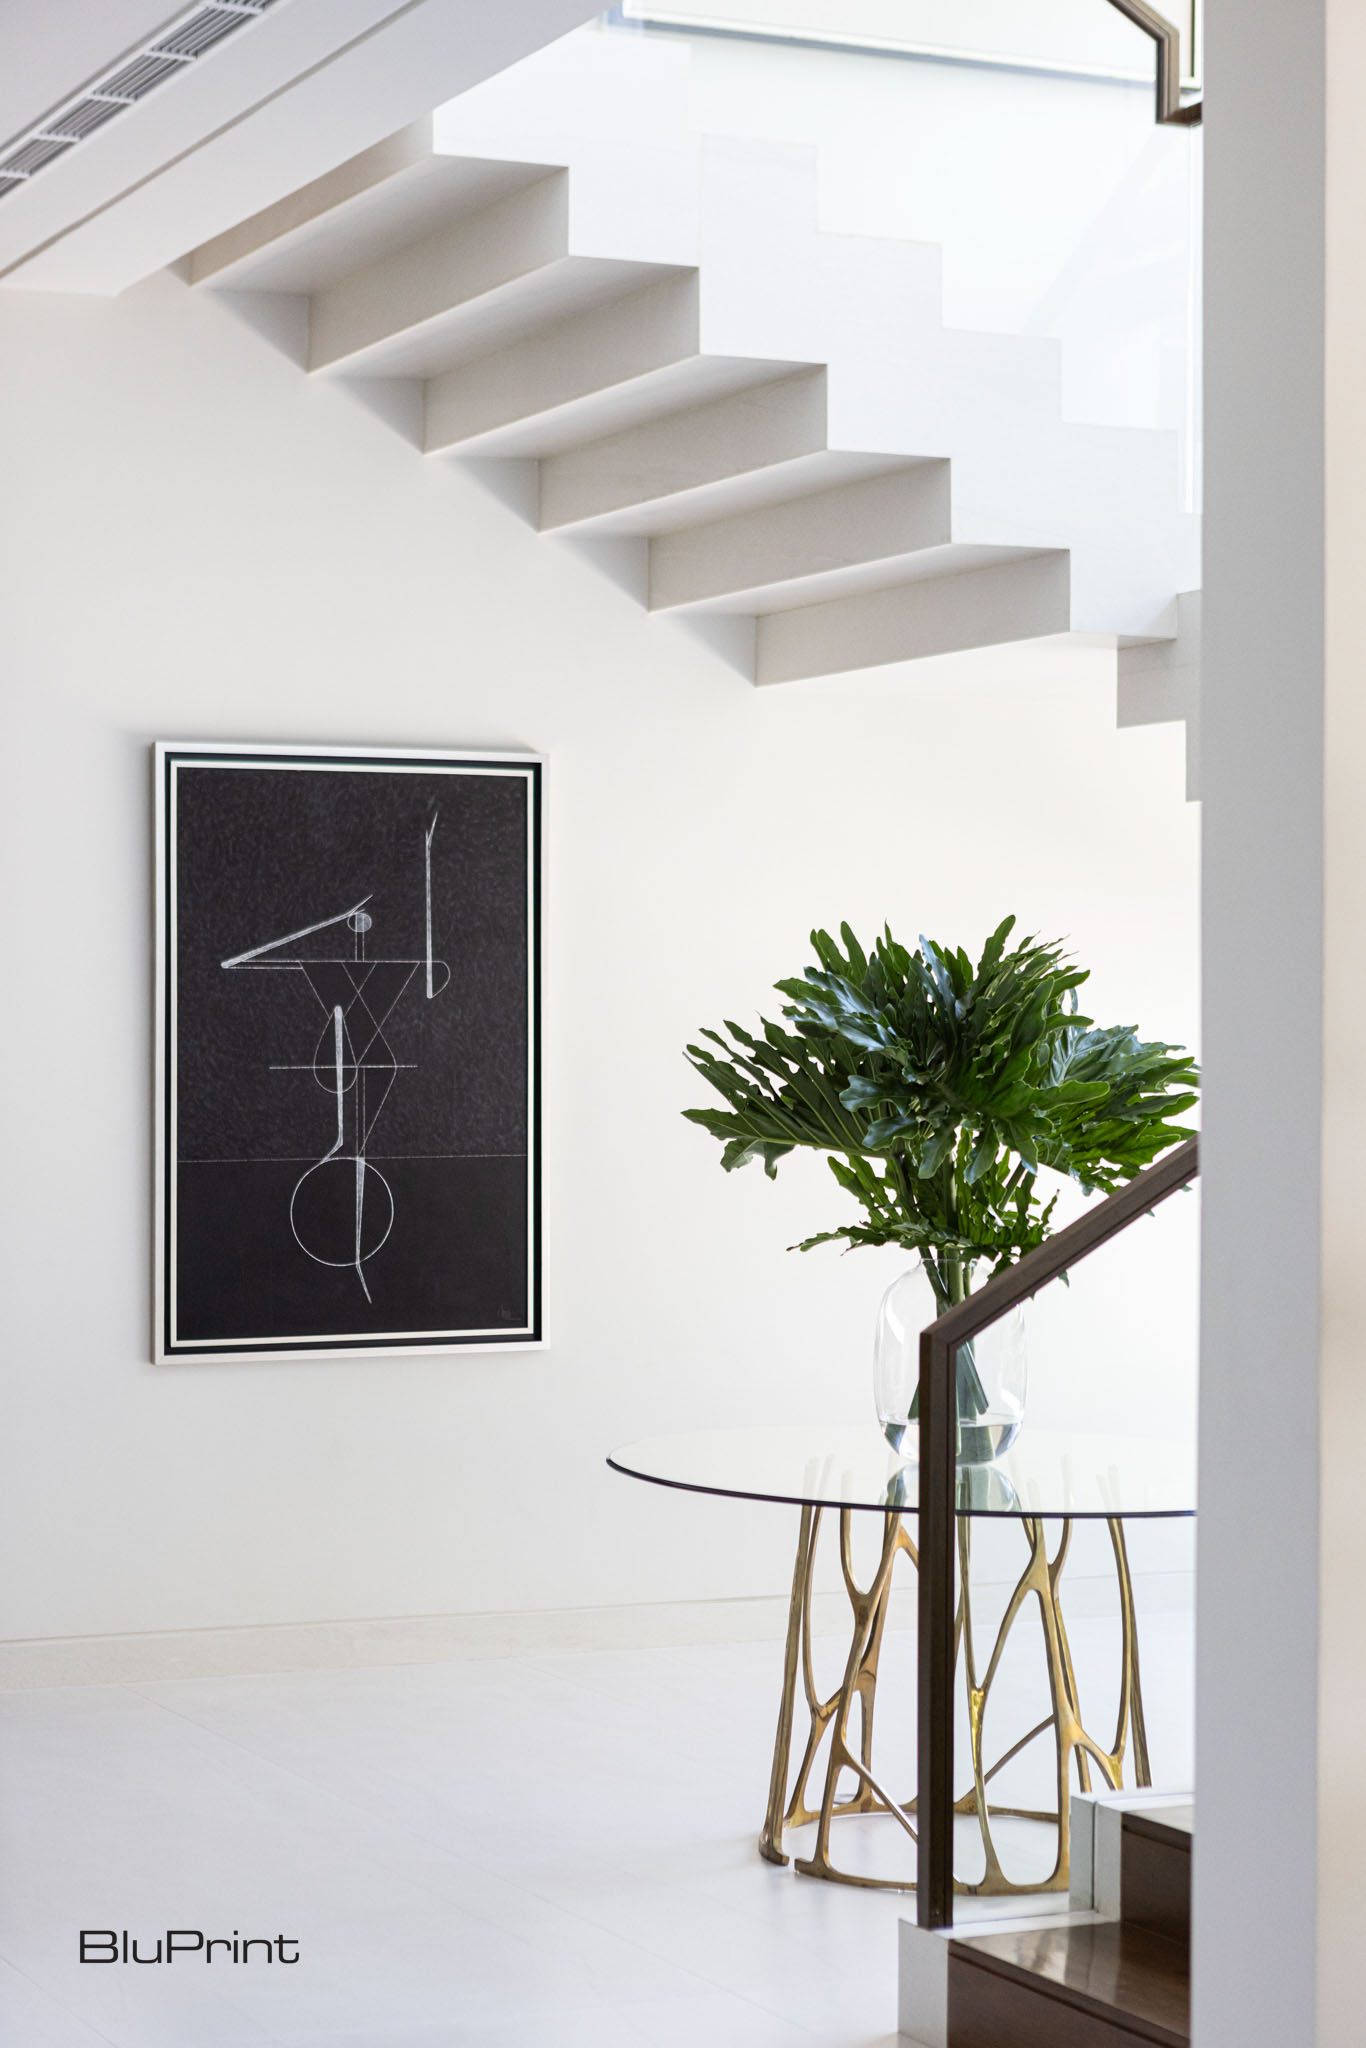 A stairway with natural light and minimalist furniture and art work